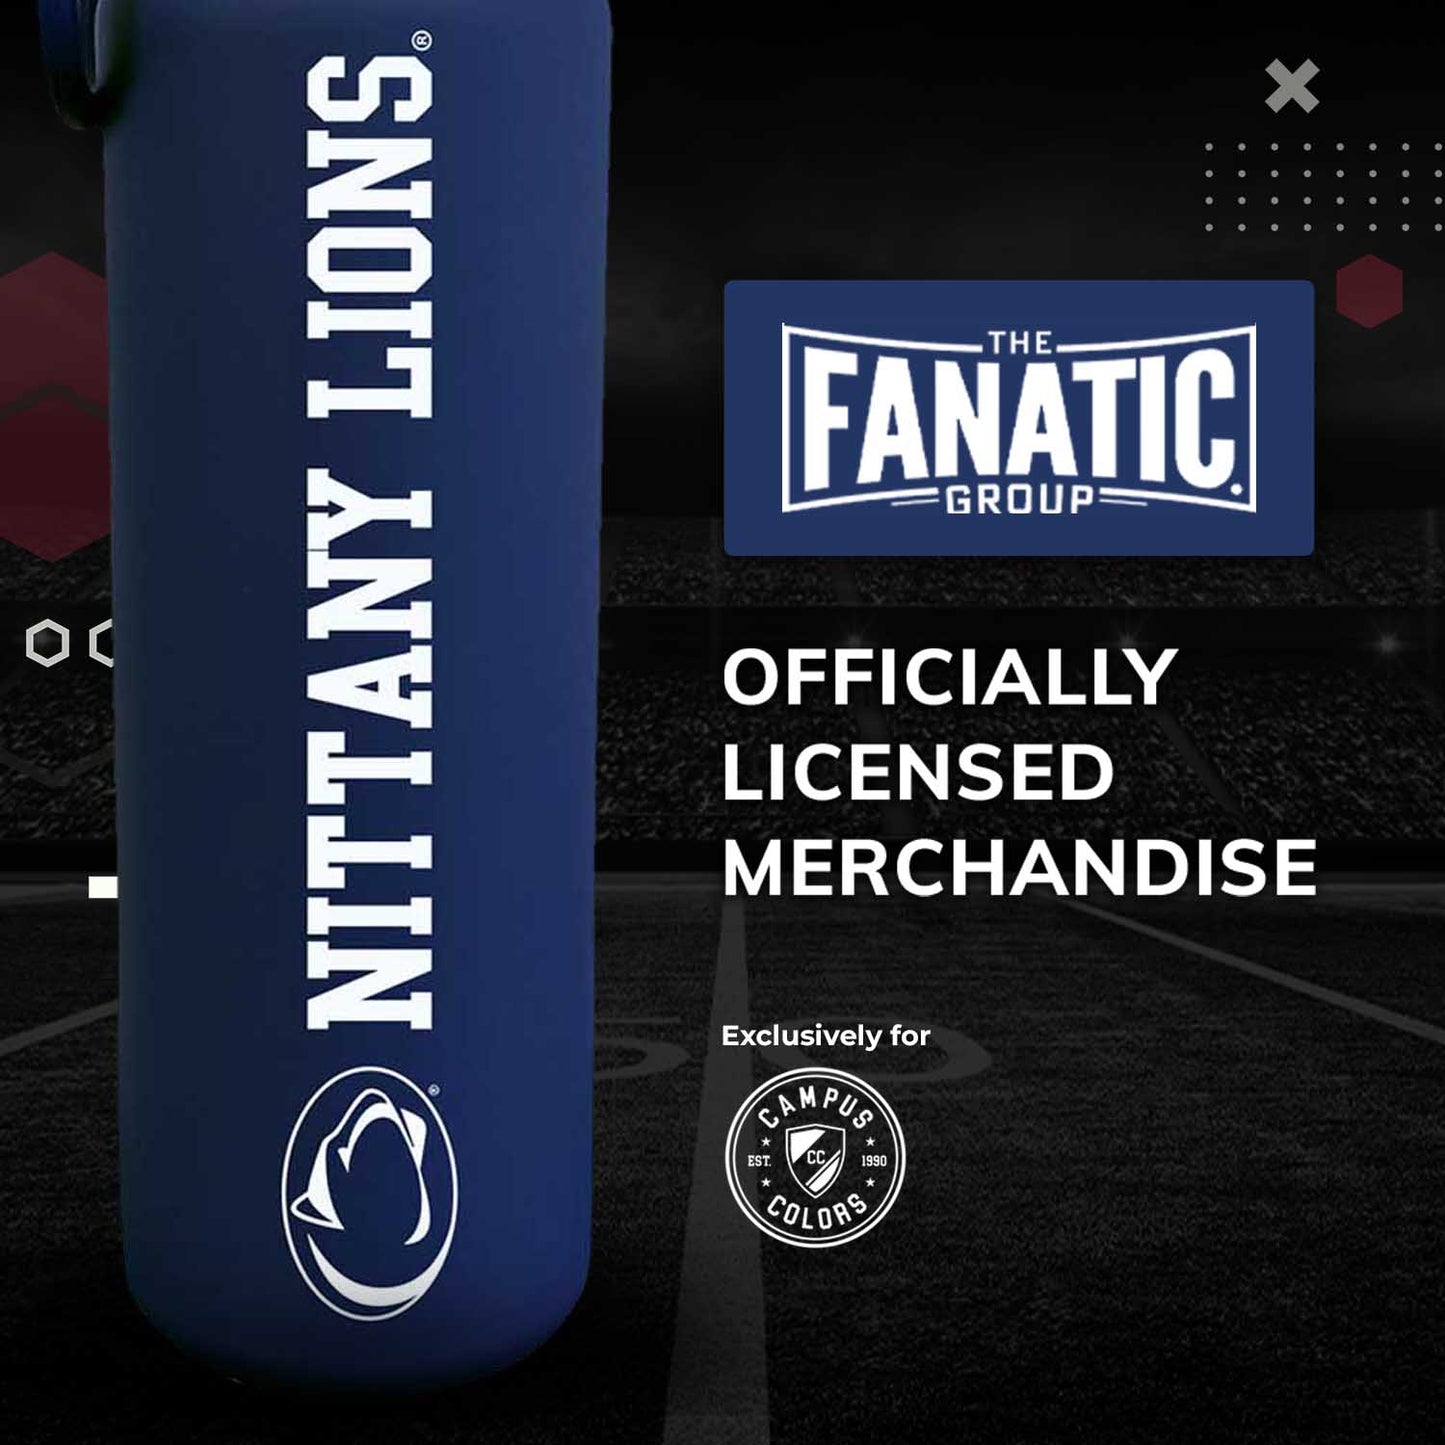 Penn State Nittany Lions NCAA Stainless Steel Water Bottle - Navy